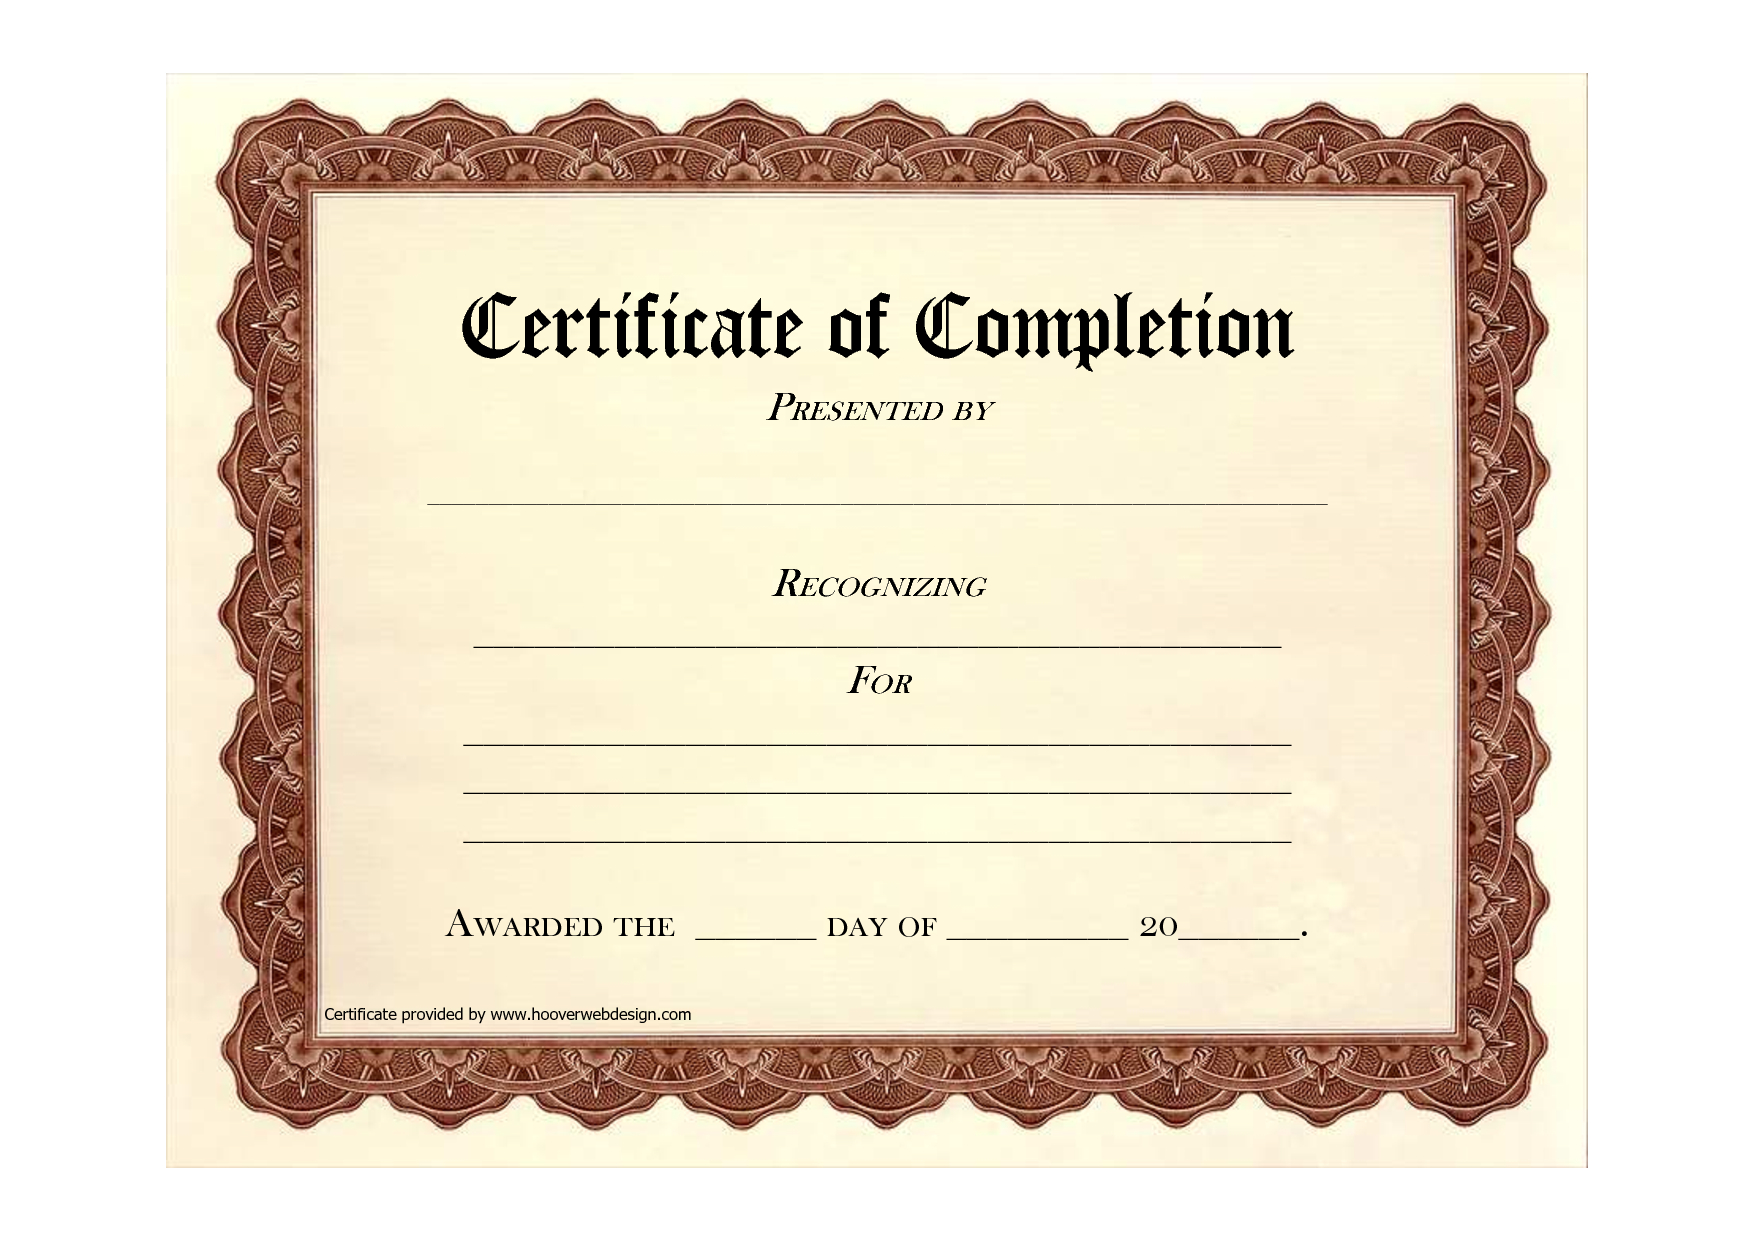 Certificate Of Completion Templates Free Download Images  Free throughout Free Completion Certificate Templates For Word